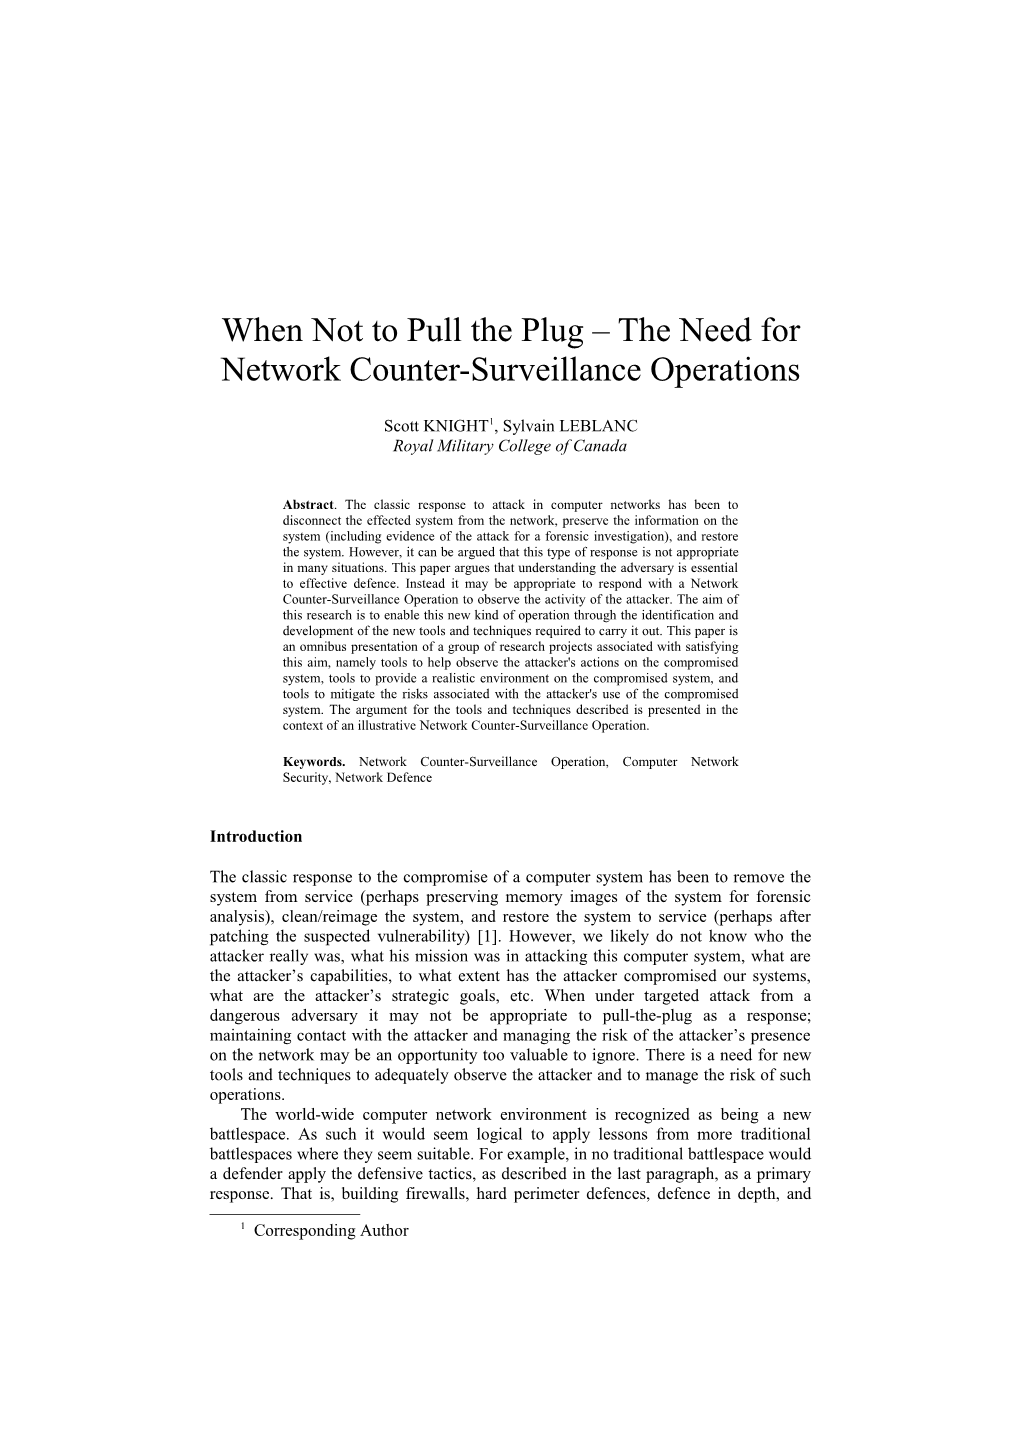 When Not to Pull the Plug the Need for Network Counter-Surveillance Operations